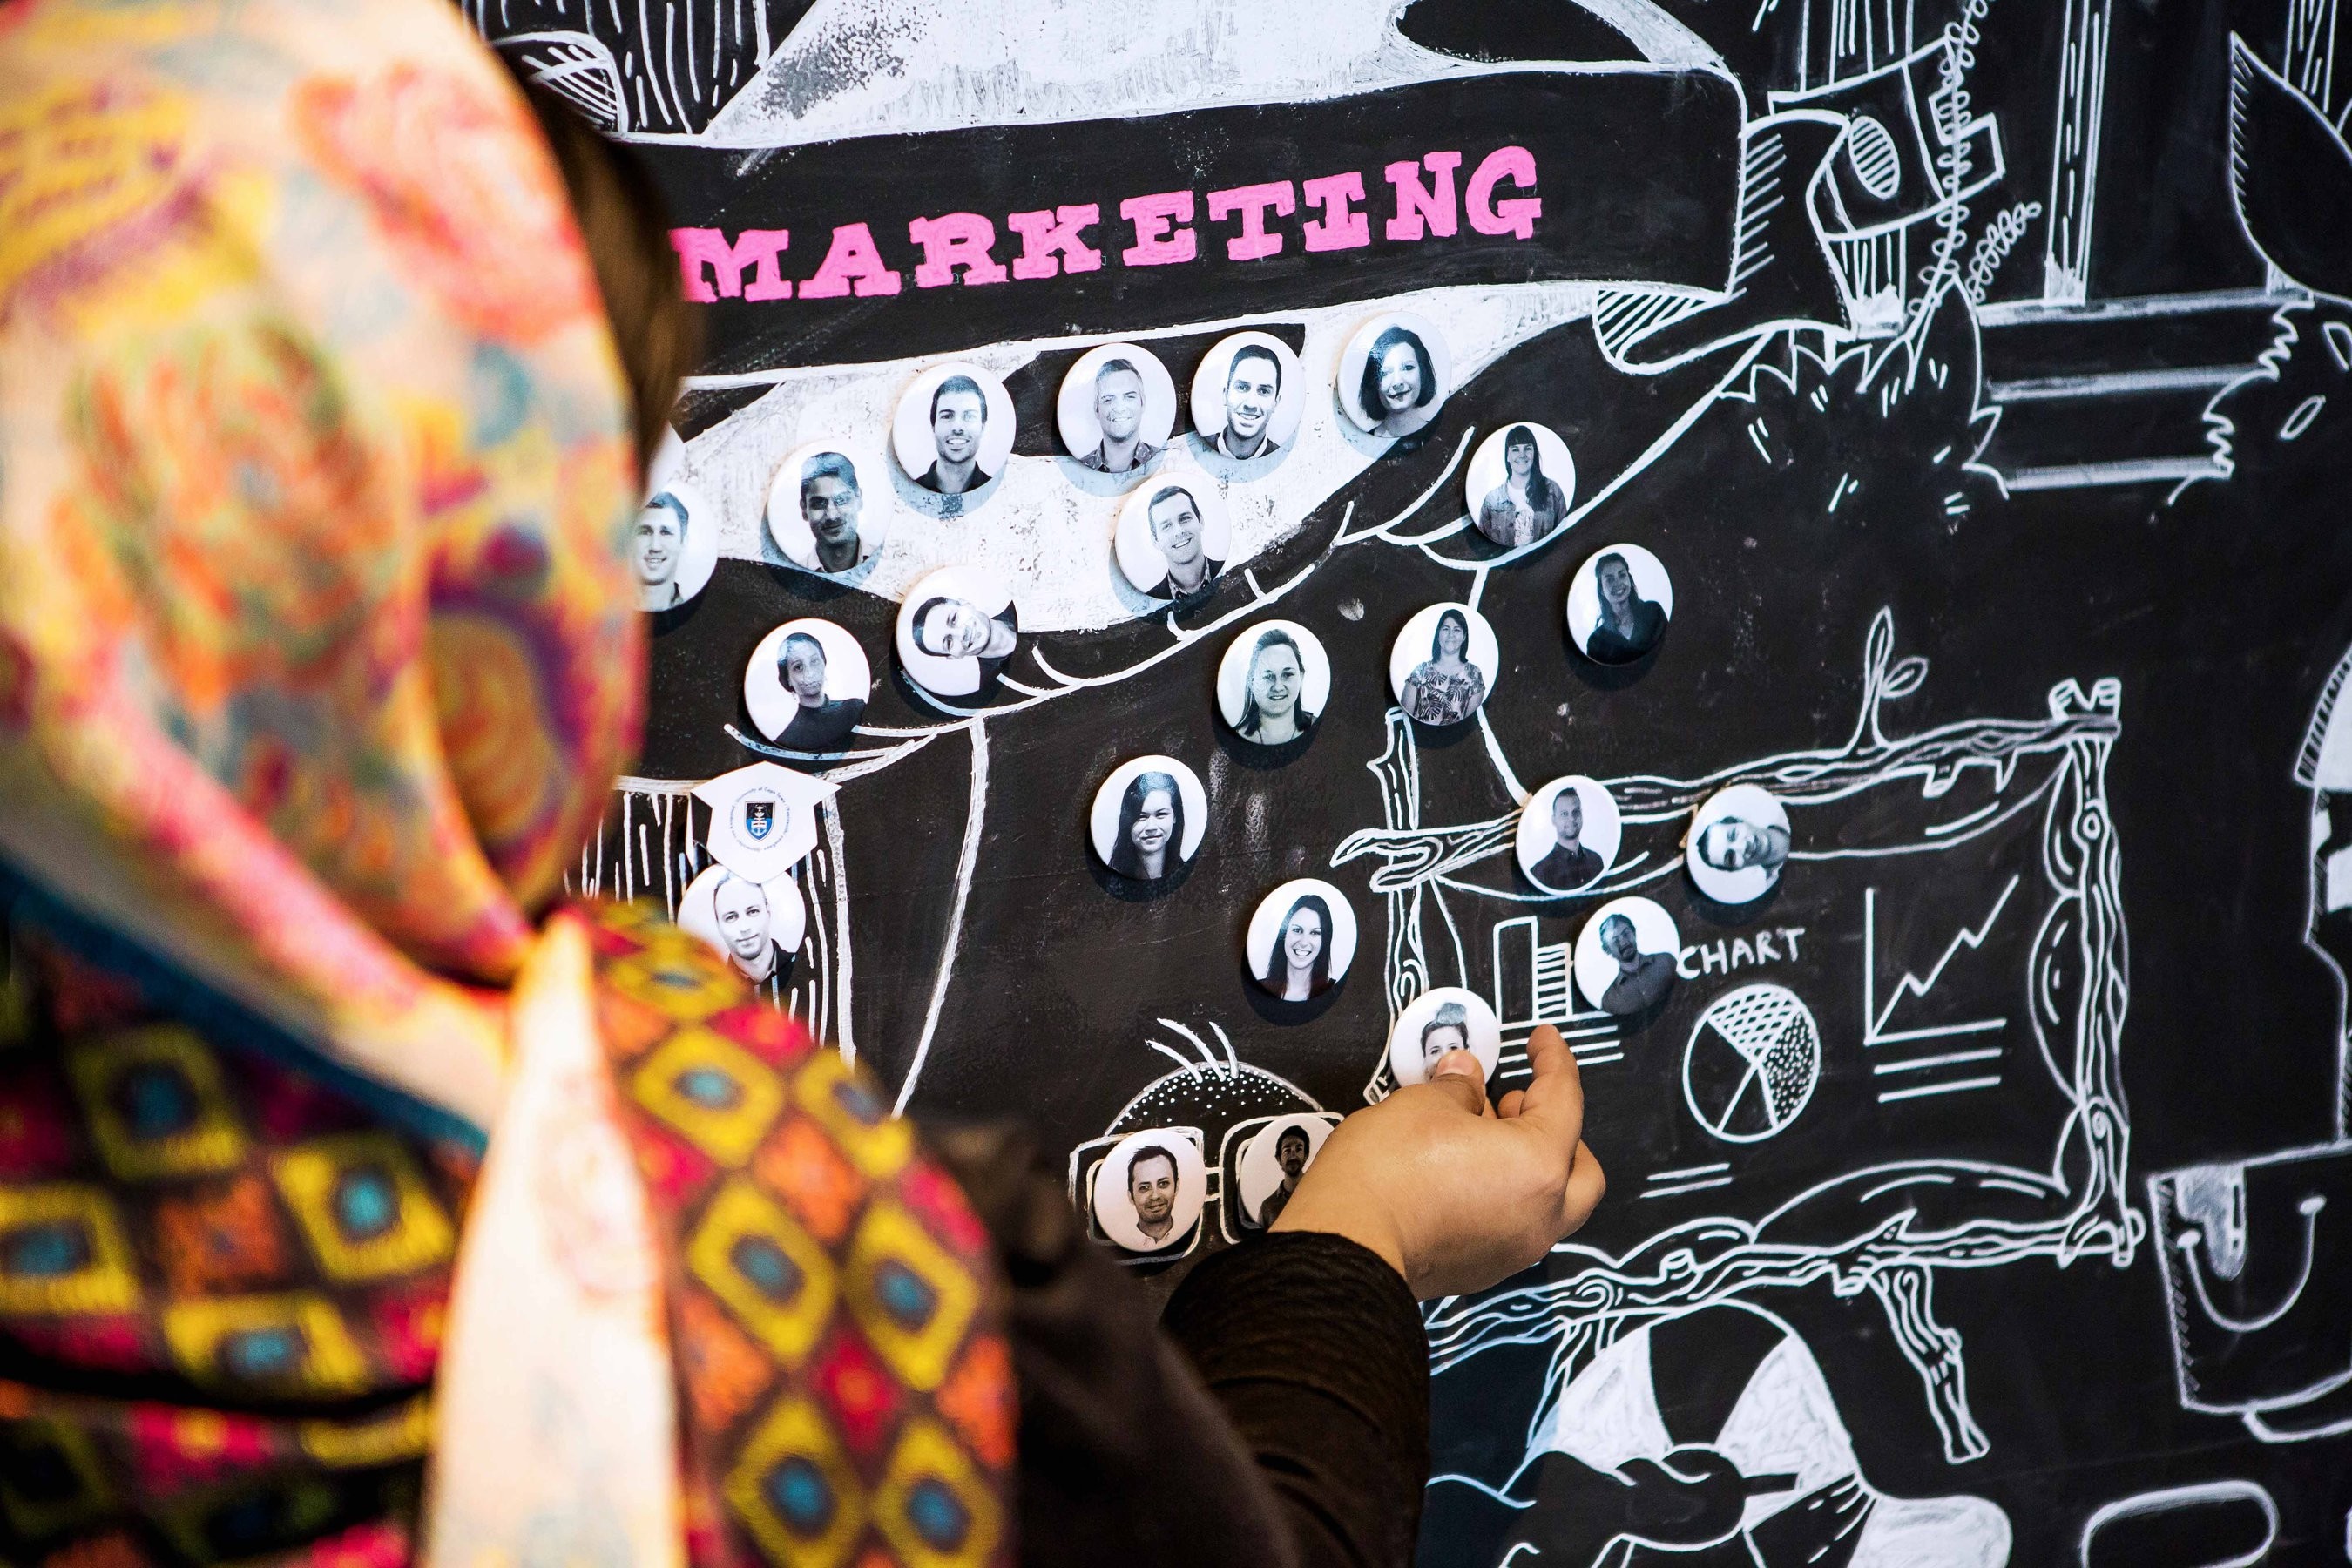 Woman wearing a head scarf adds a pin with a colleague's face on it to a mural with other pins on it titled "Marketing"